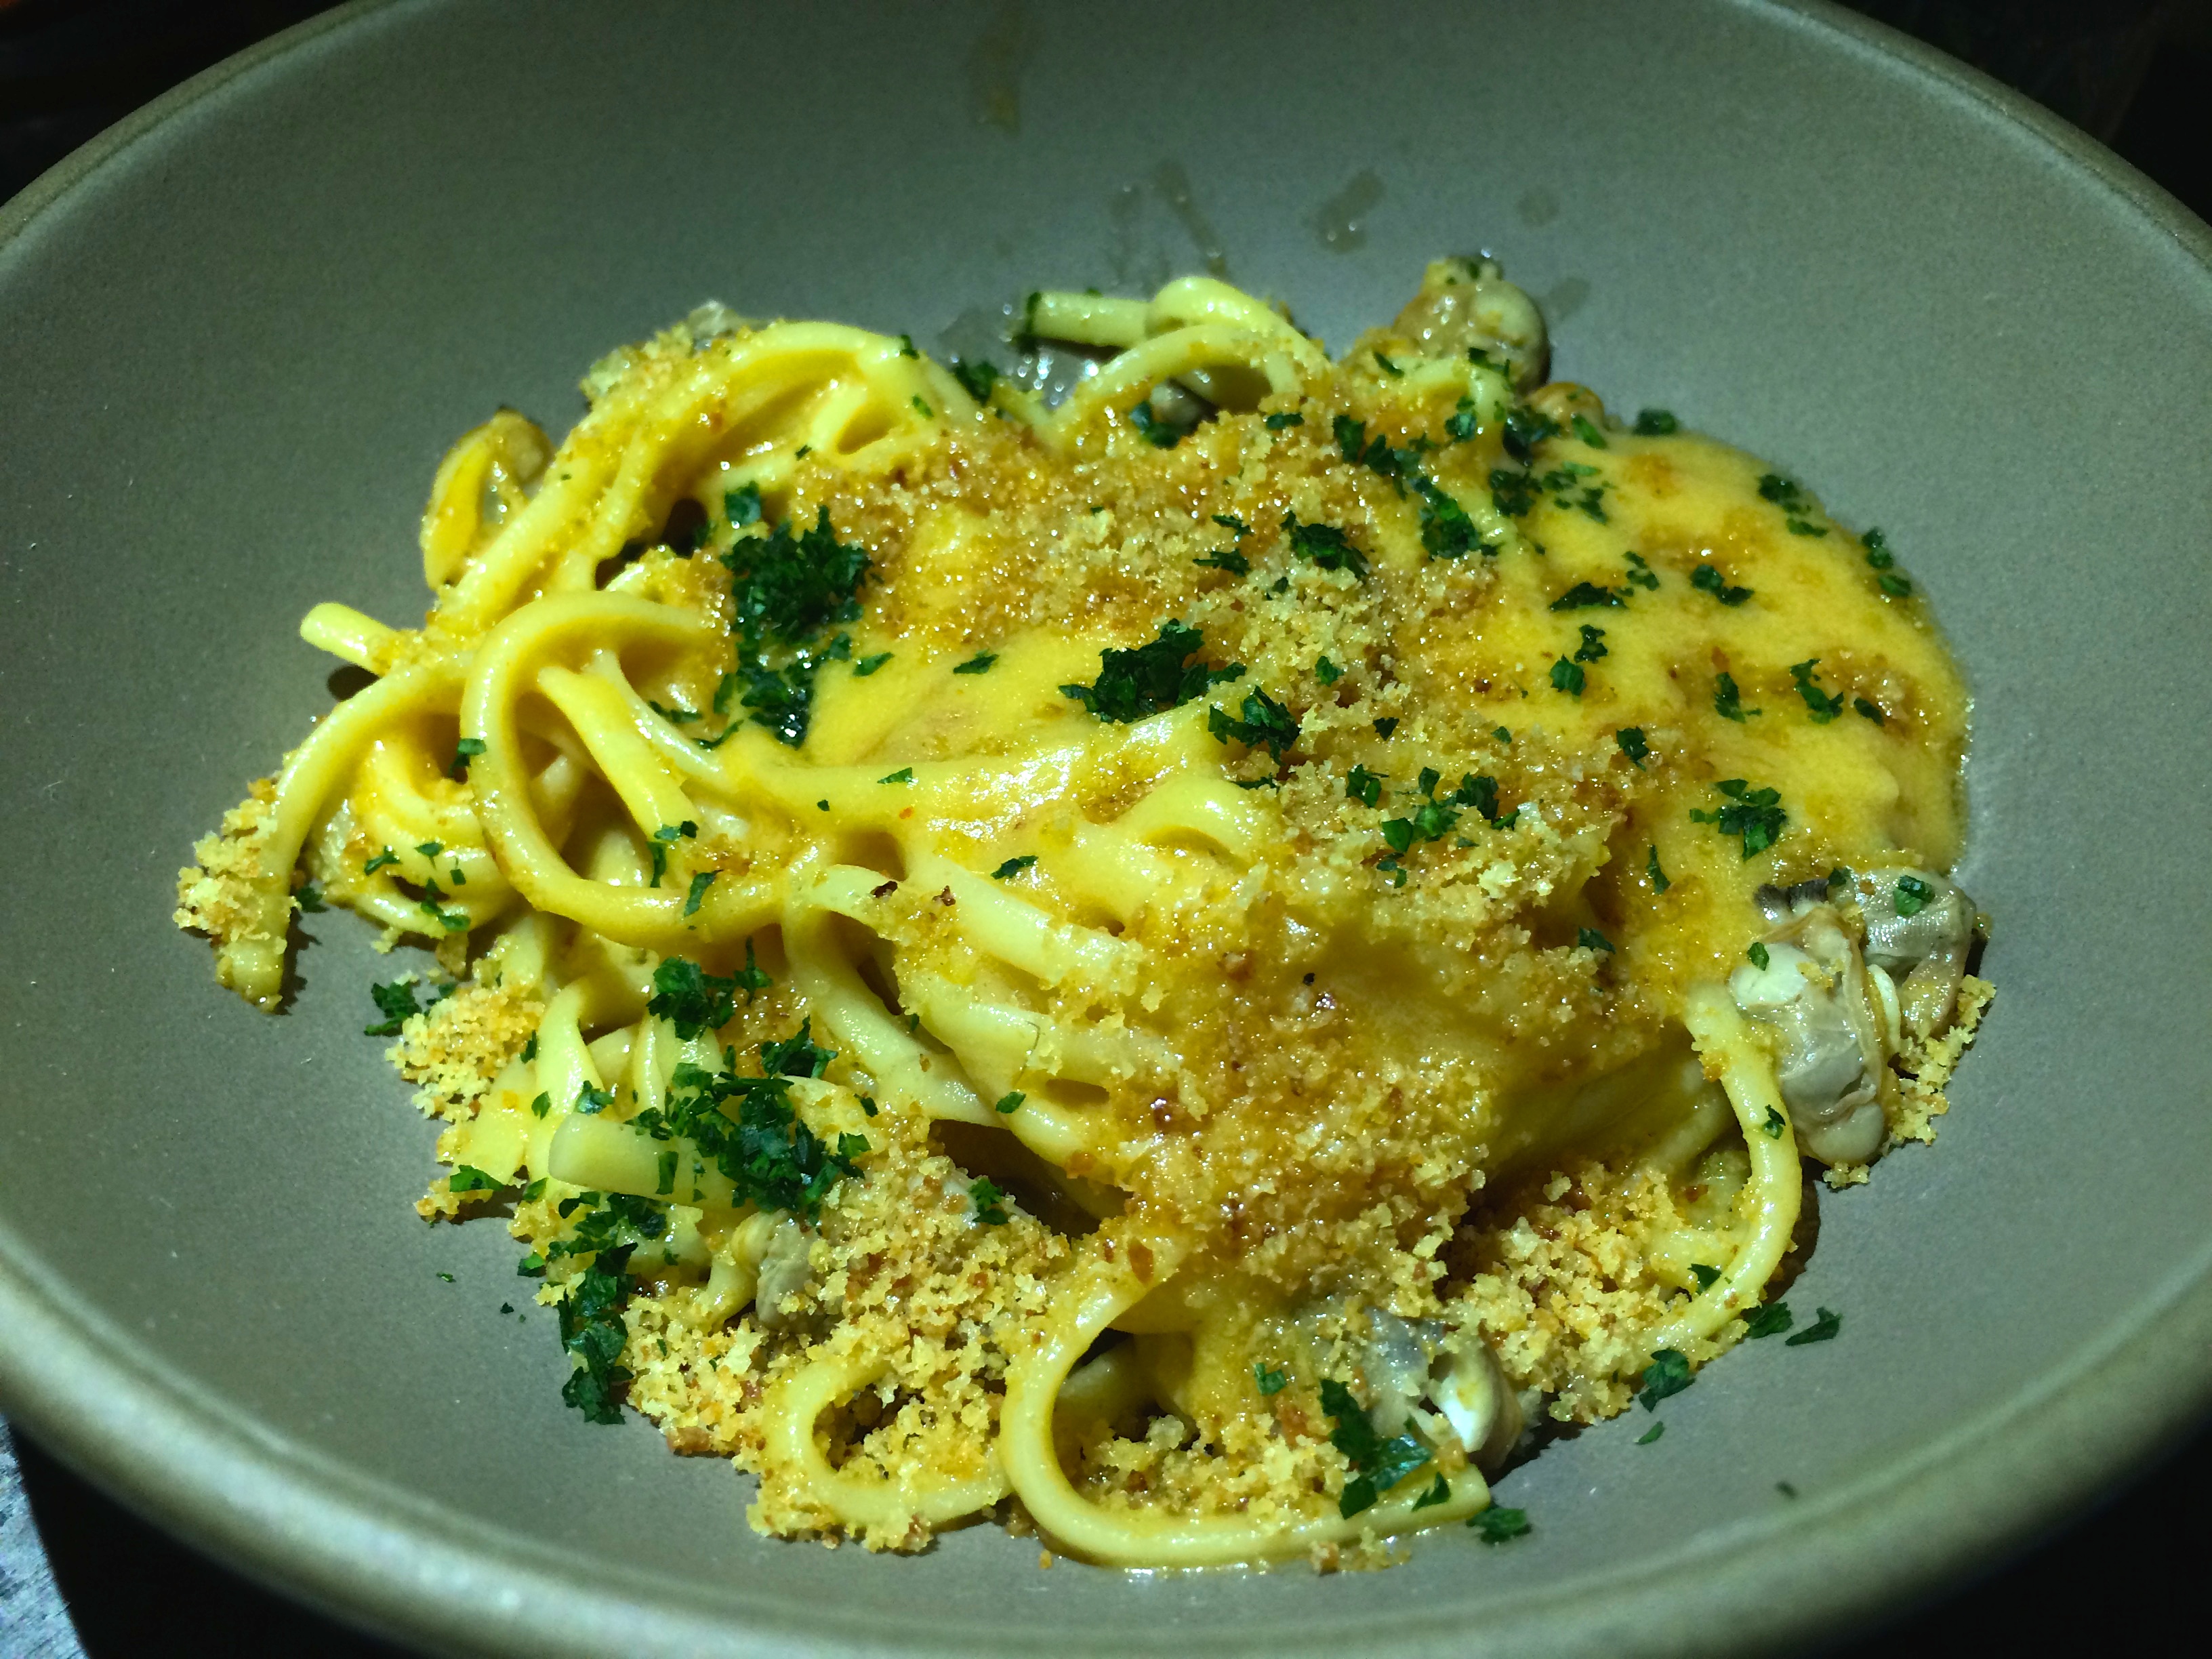 a bowl of pasta with cheese and herbs